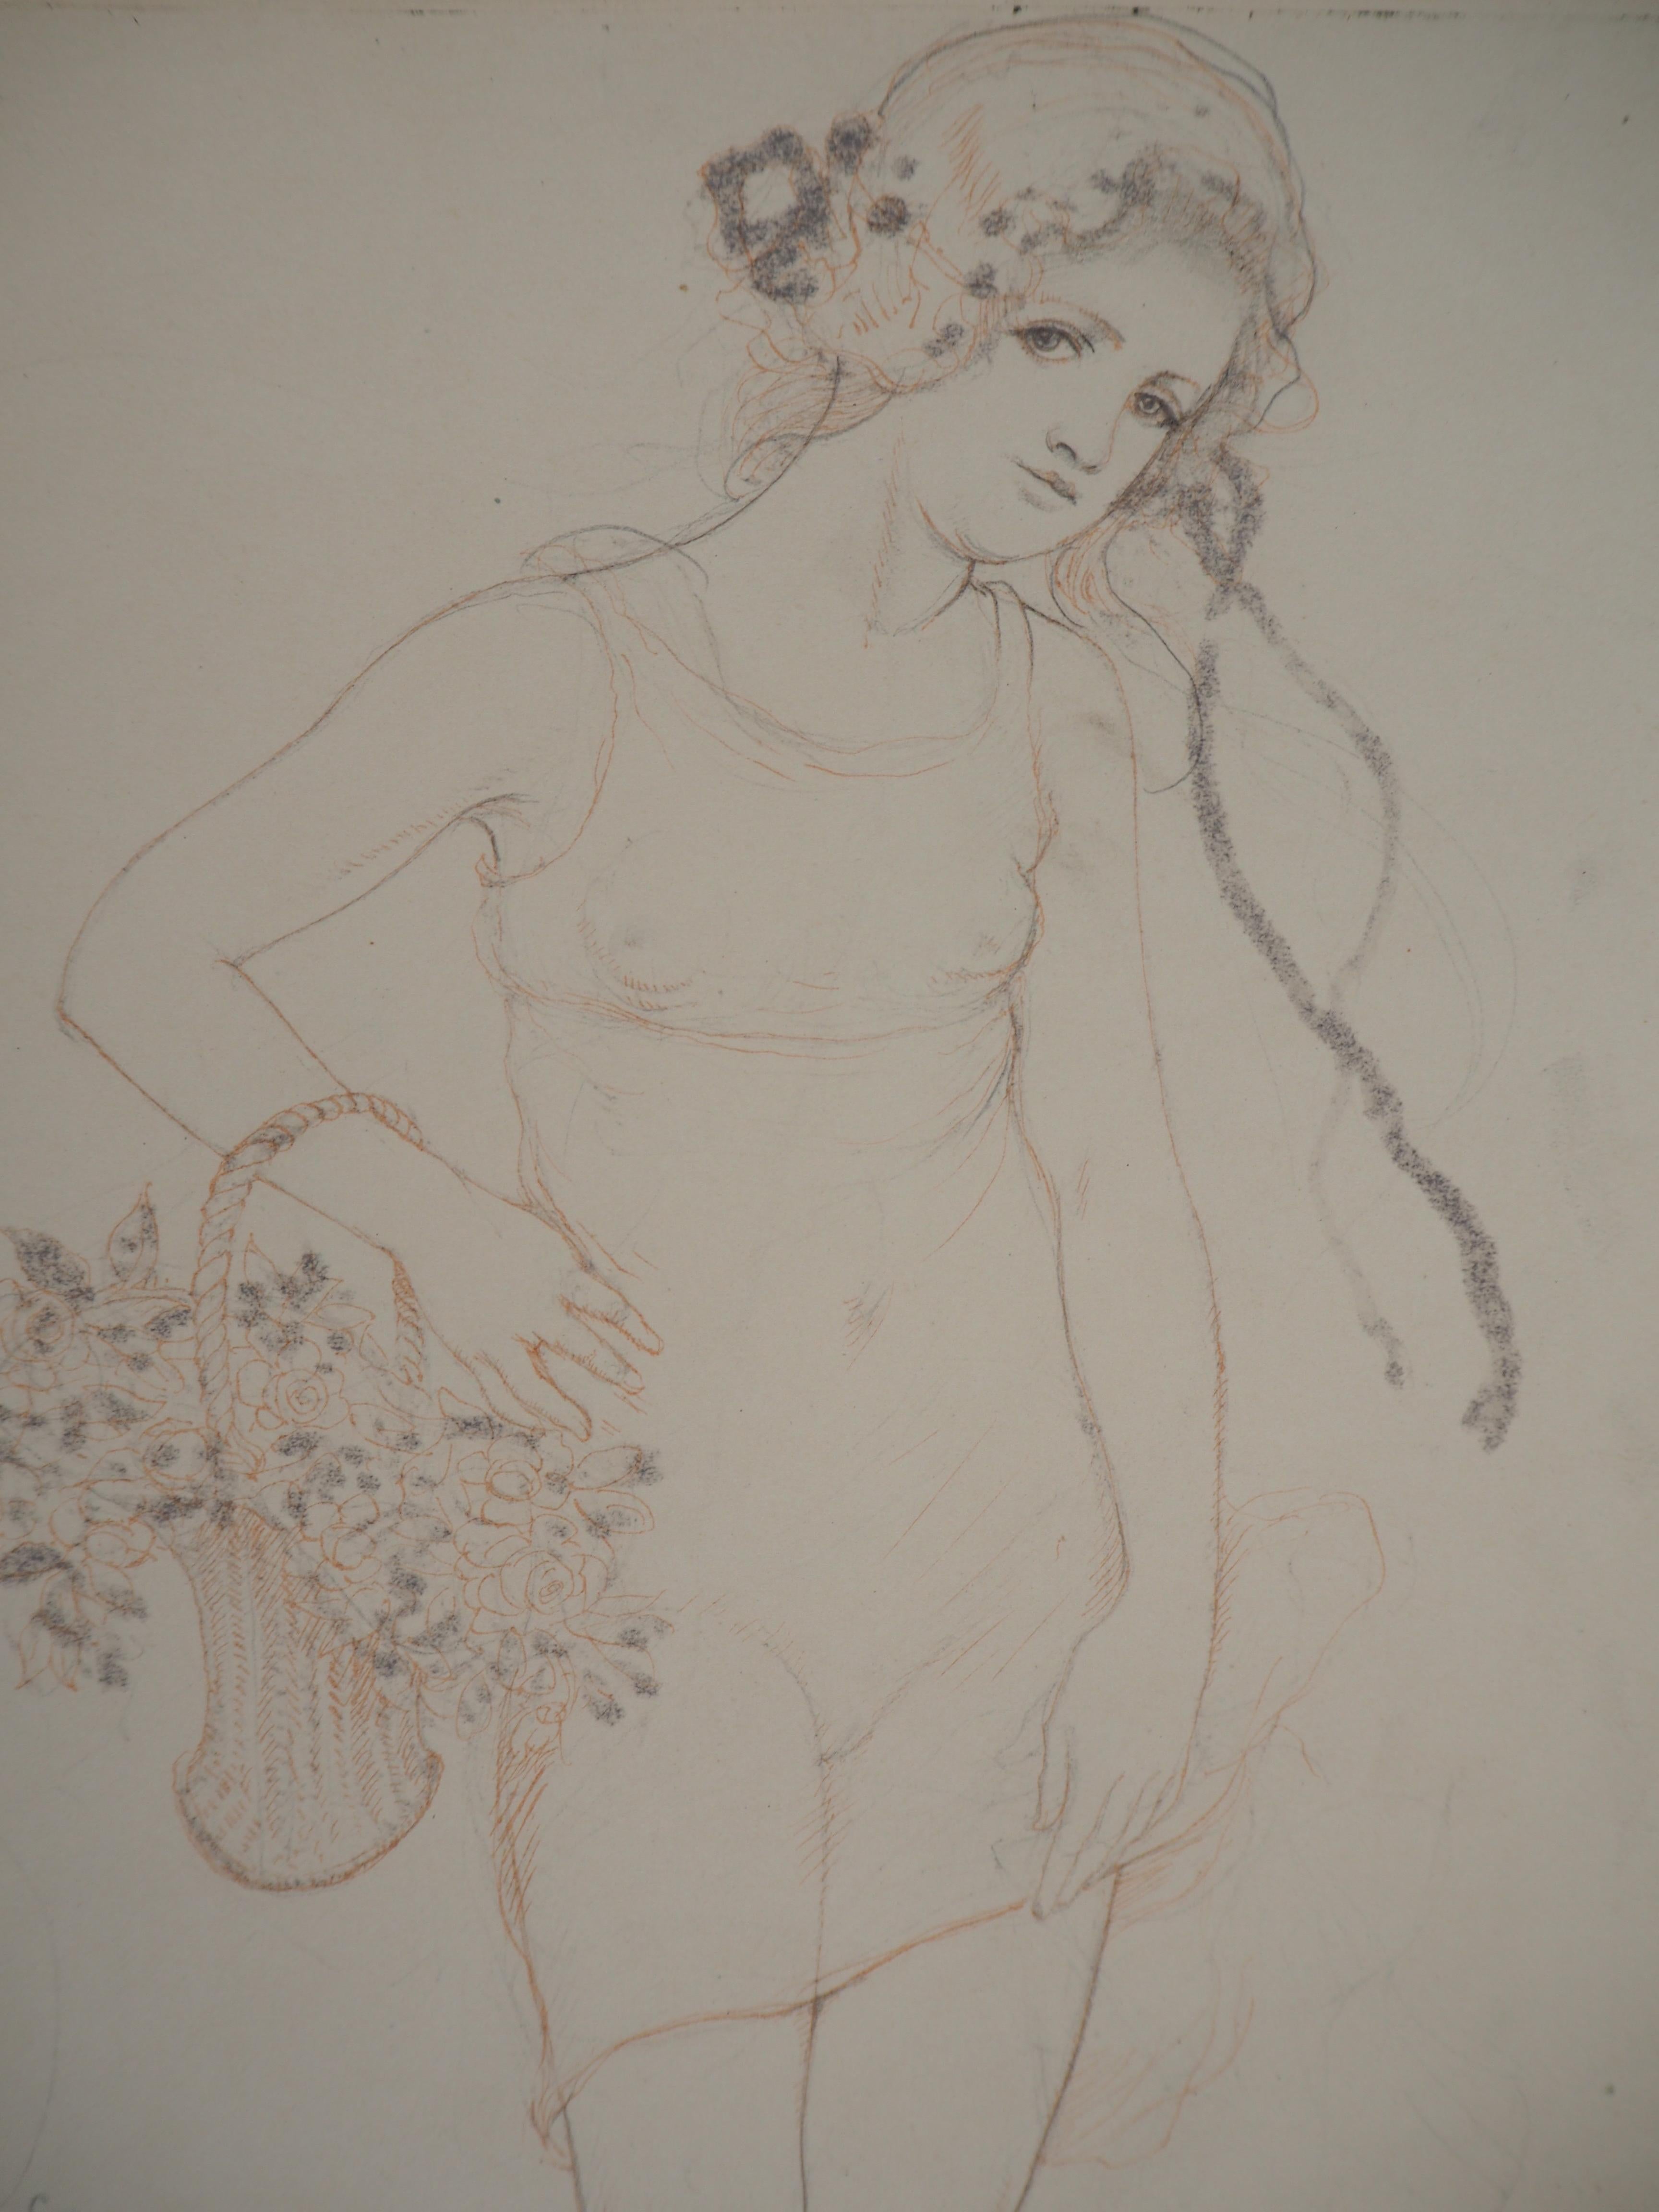 Young Girl with Flowers - Original drawing, Handsigned - Modern Art by Armand Rassenfosse